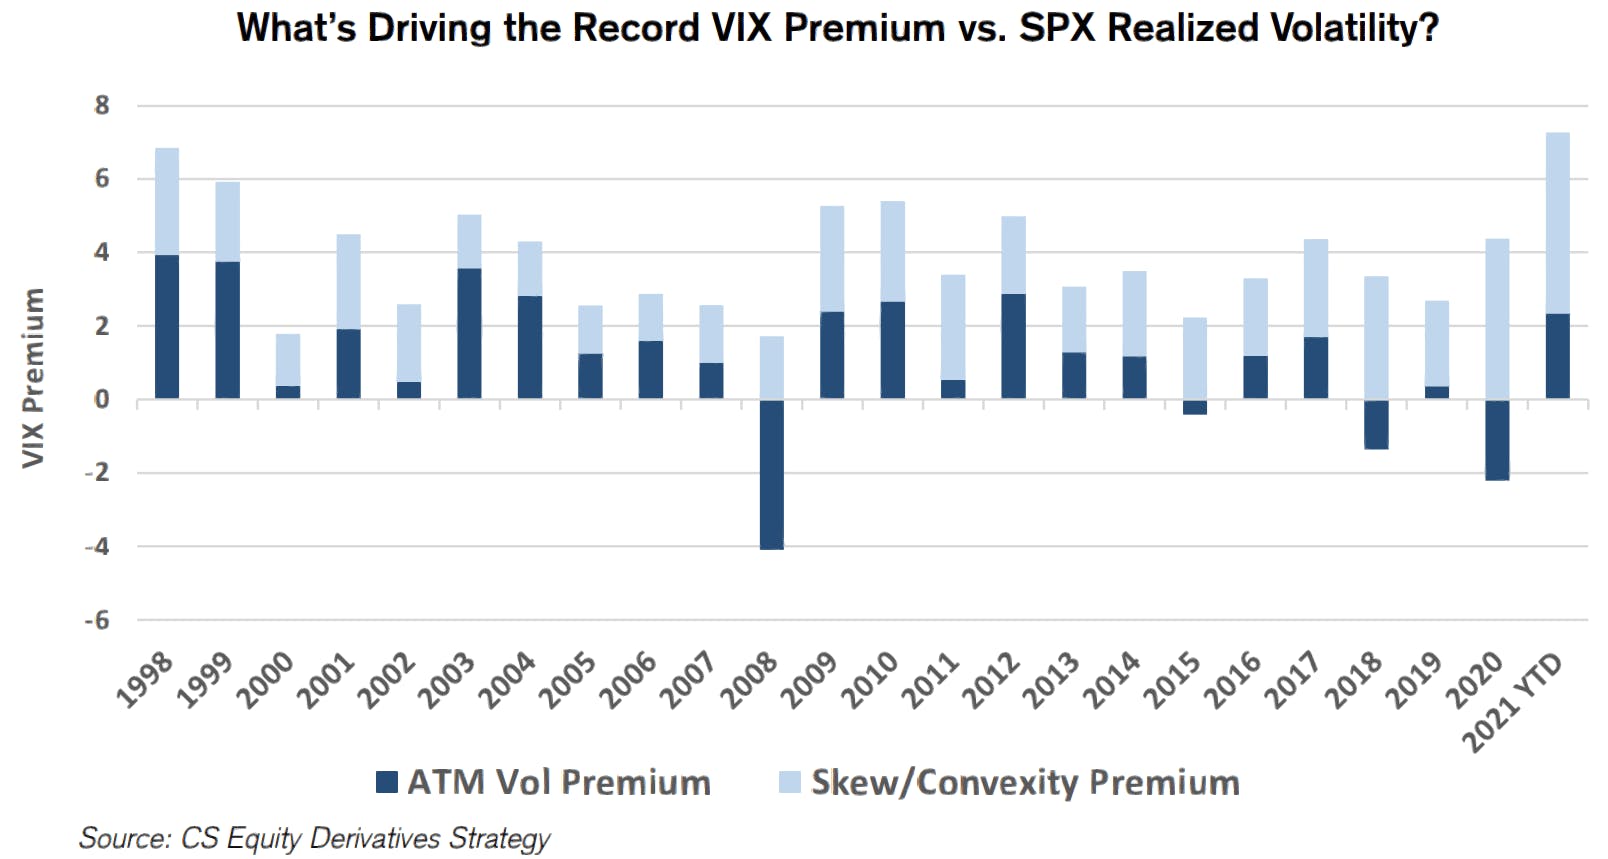 What is driving the implied volatility premium relative to realized volatility | Source: Credit Suisse